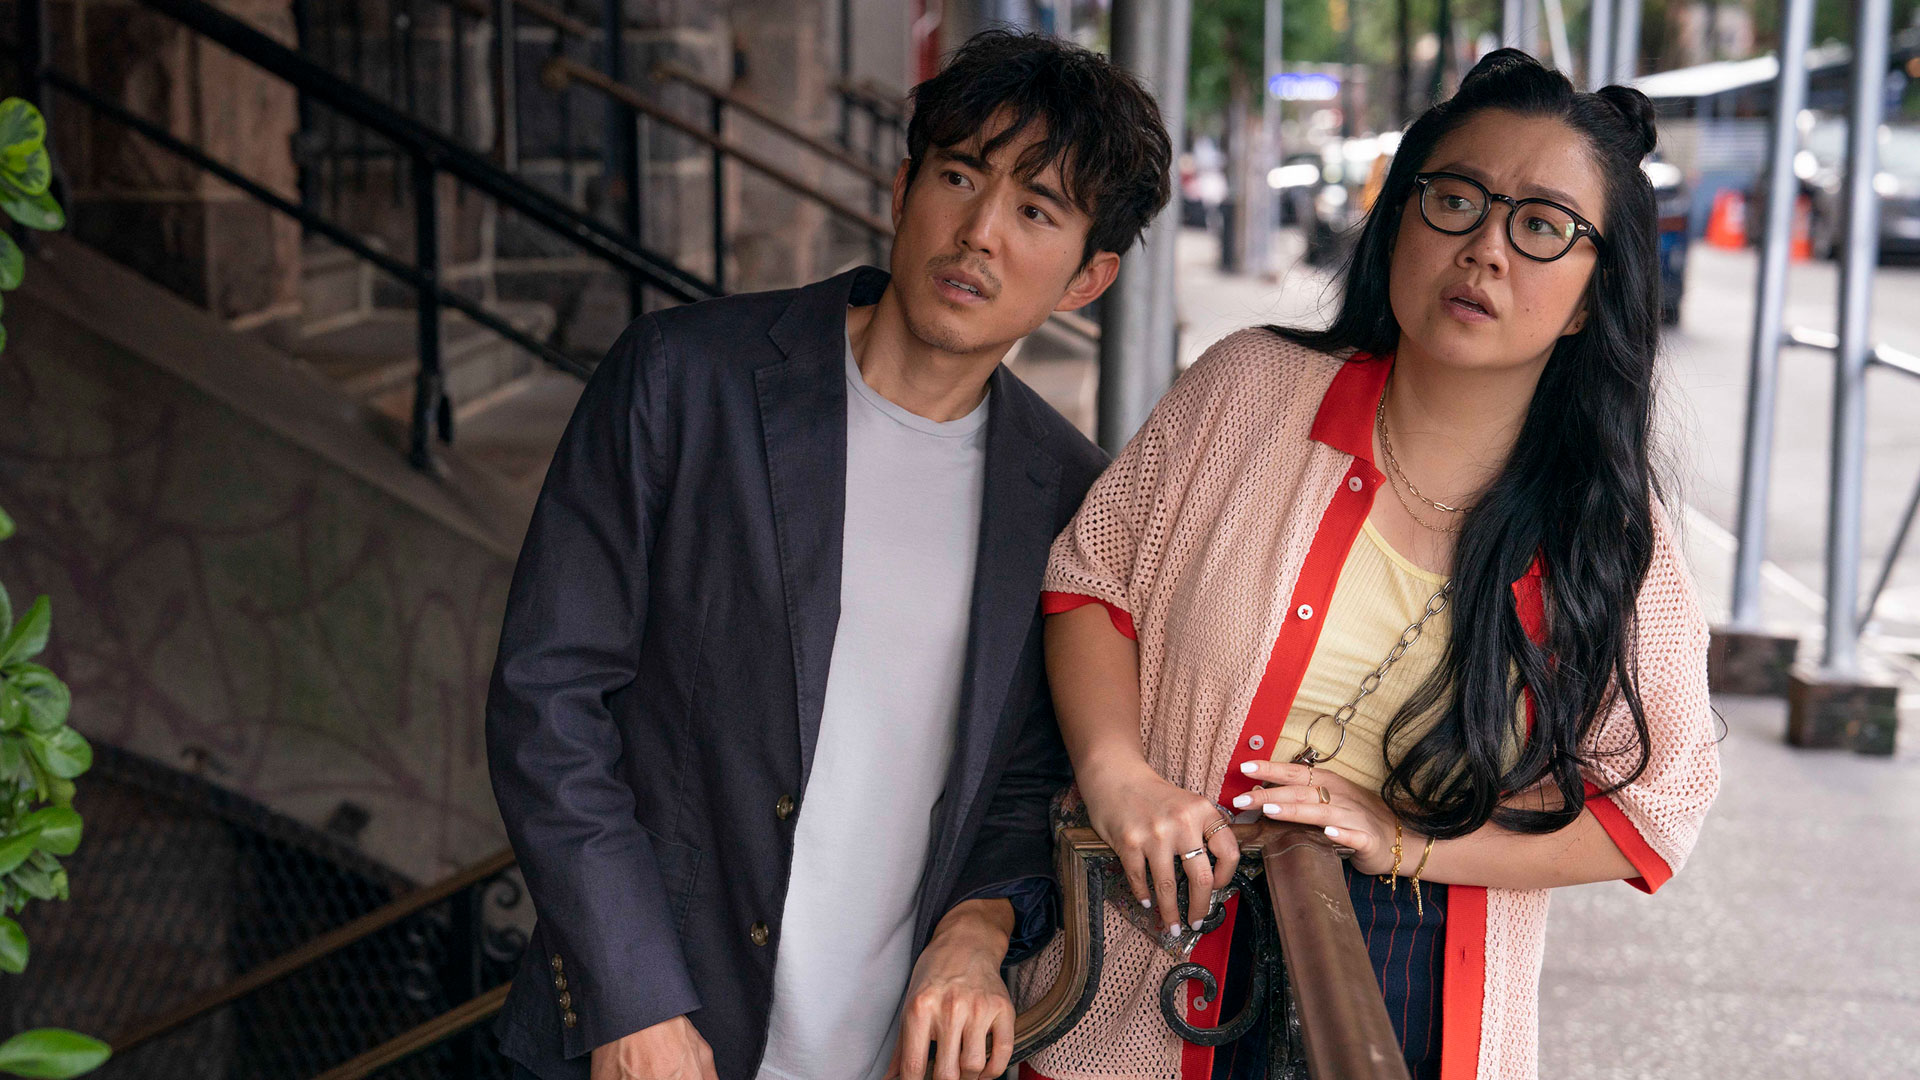 Randall Park’s Shortcomings movie debuts this weekend at Sundance